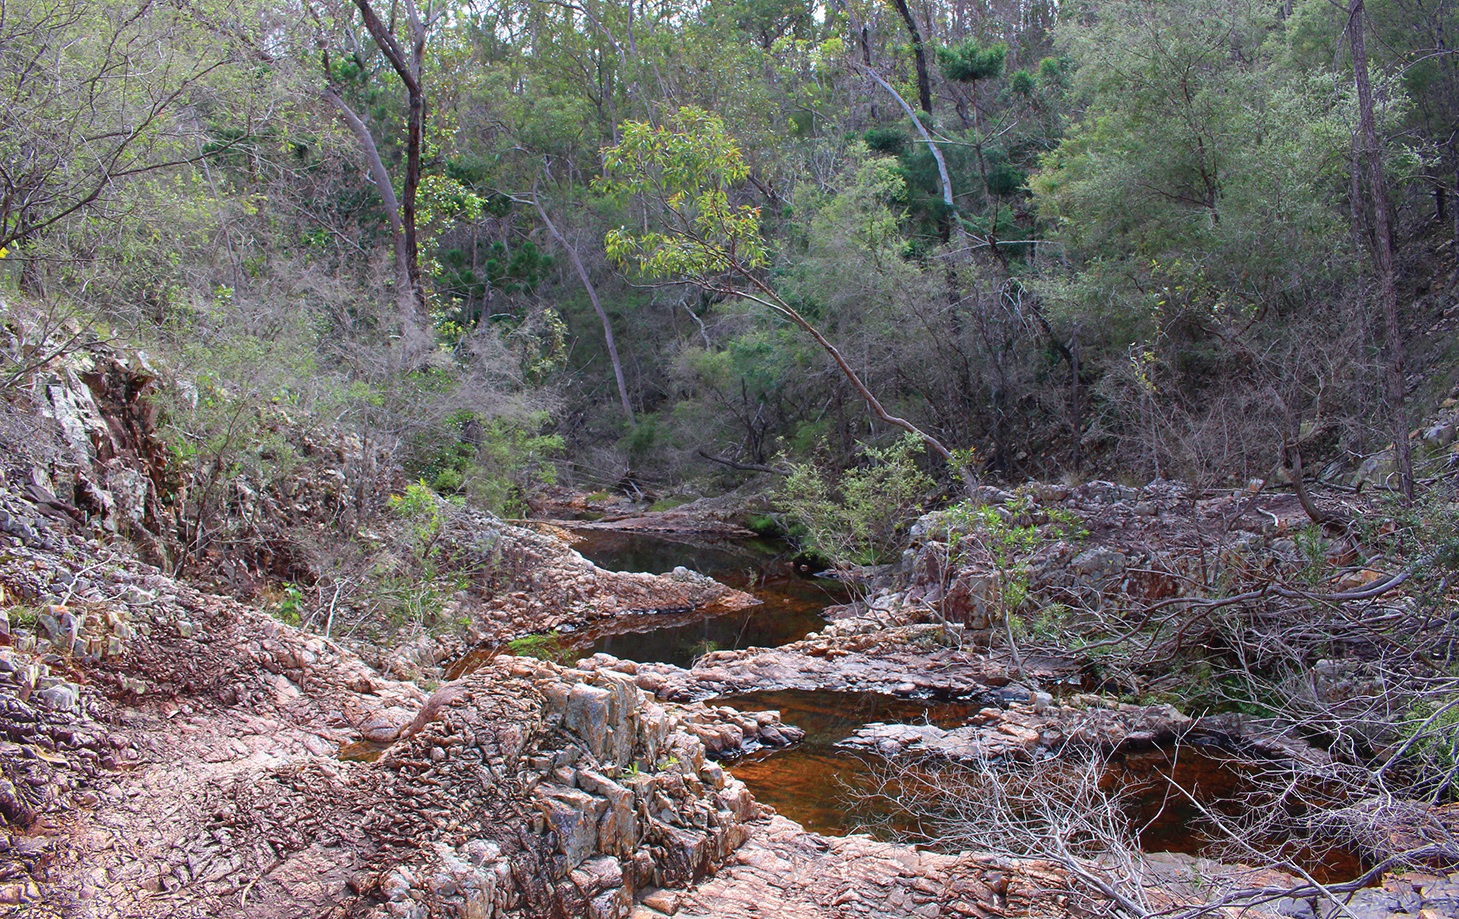 The main gully with waterholes and small waterfalls